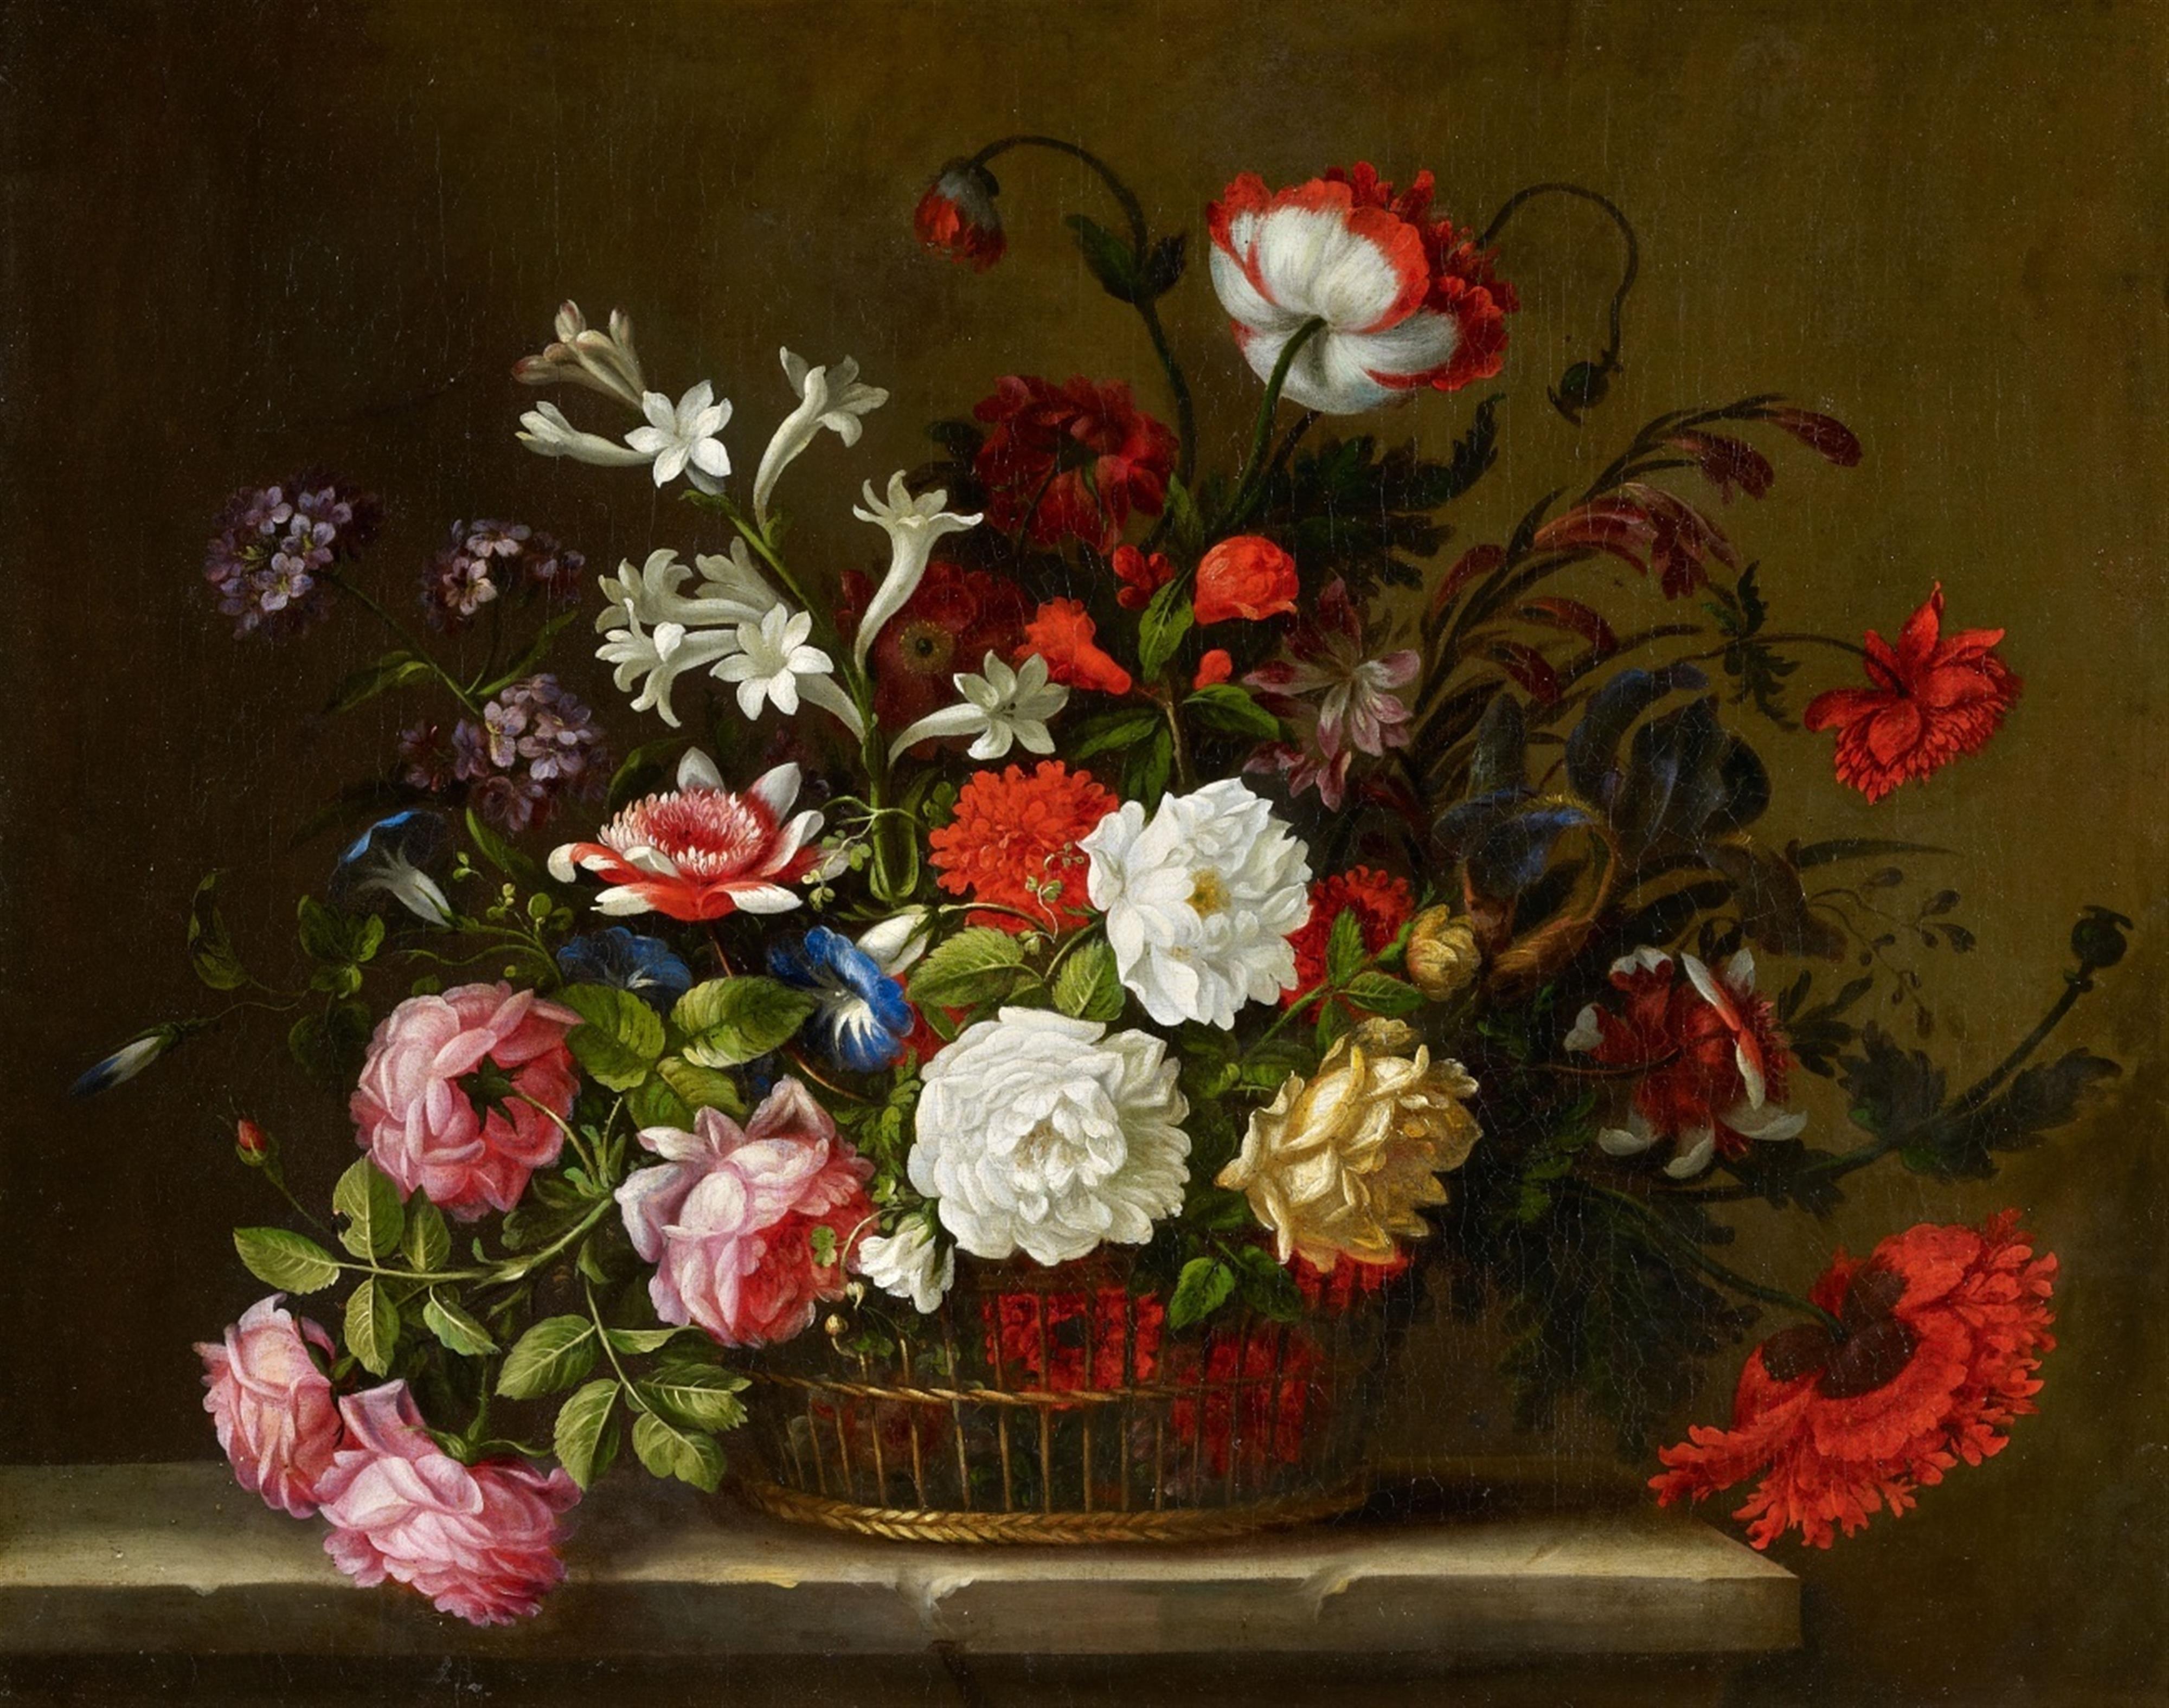 French School, 17th century - Still Life with Peonies, Poppies, and other Flowers in a Basket - image-1